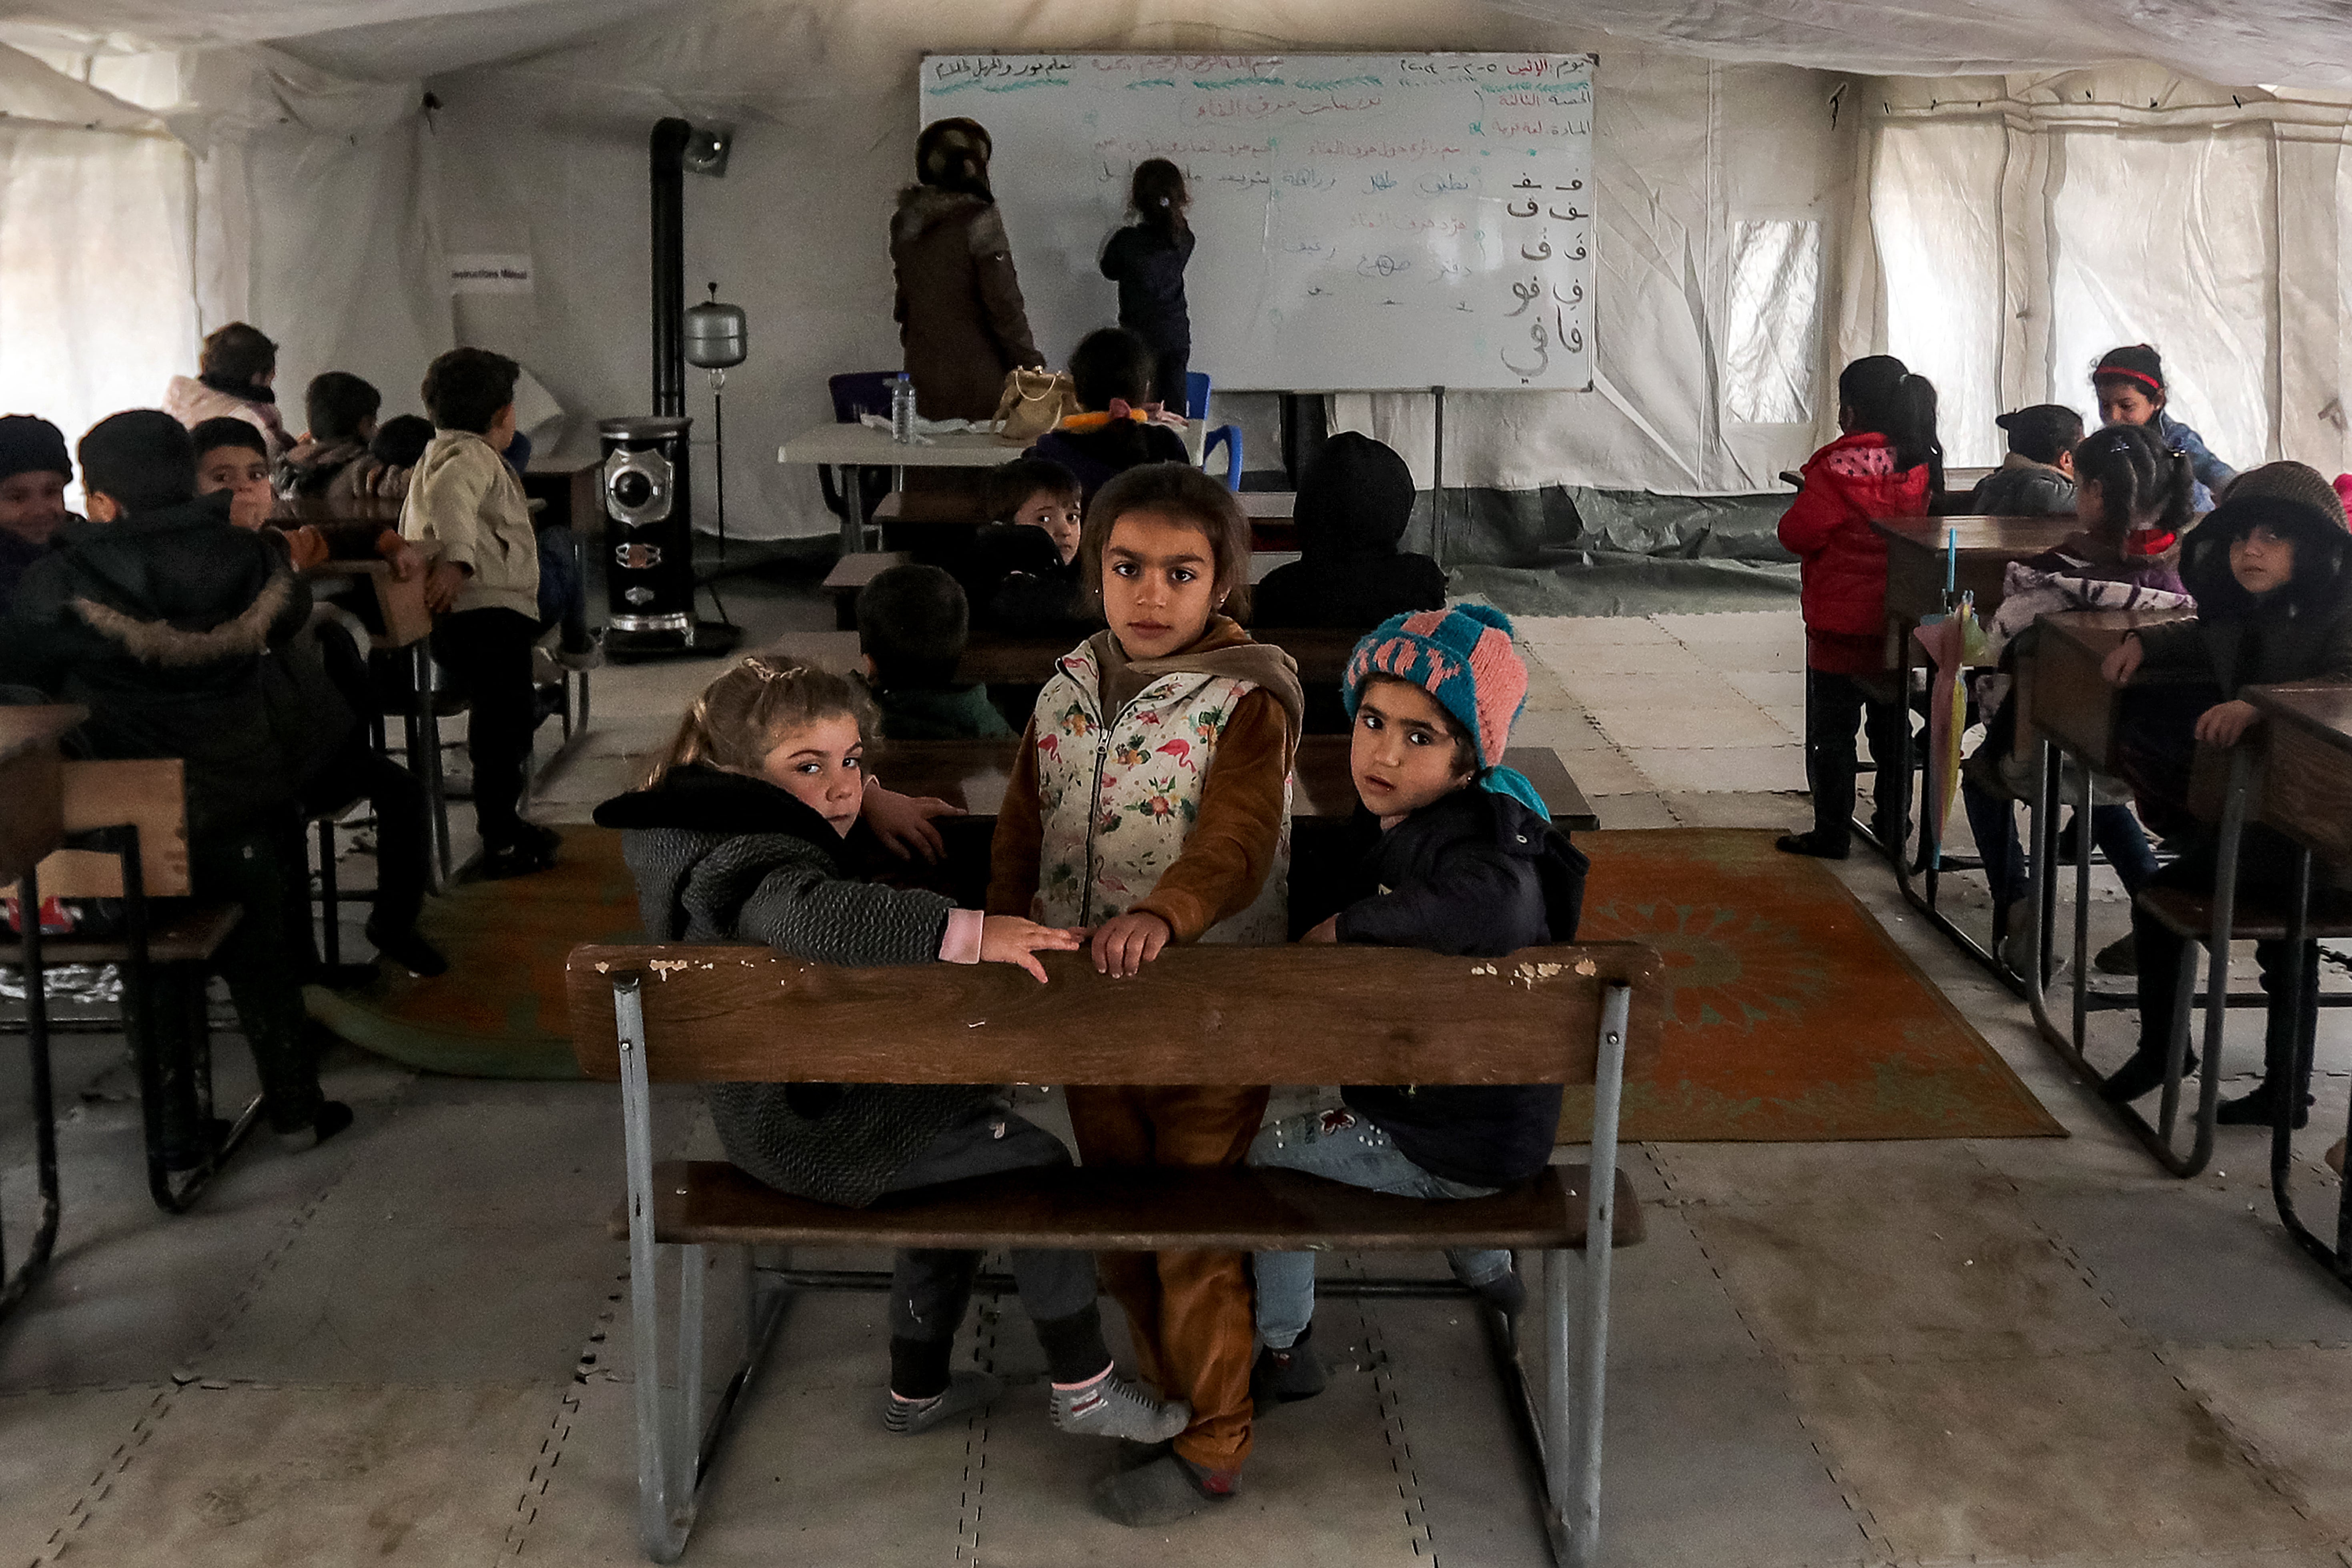 Children sit at a tent used as a makeshift school classroom in the town of Jindayris in the northwest of Syria’s Aleppo province